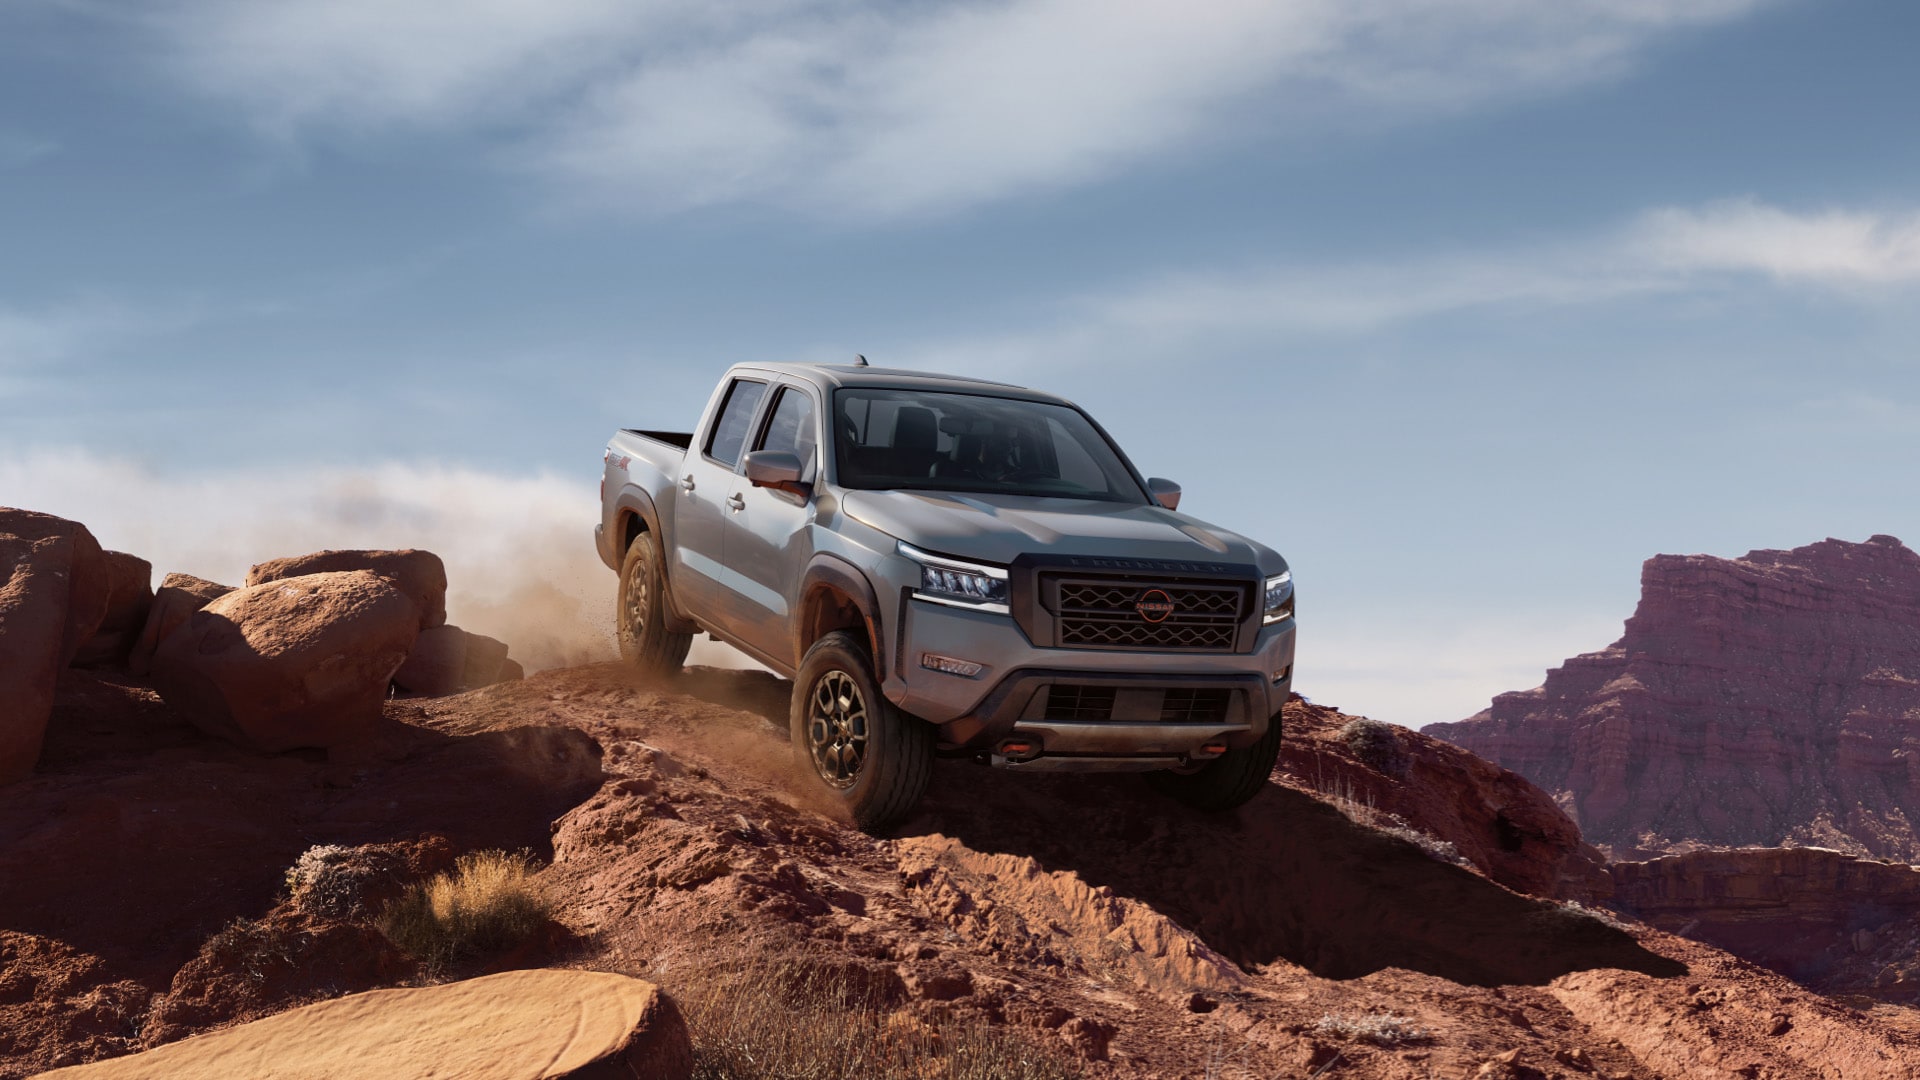 A 2022 Nissan Frontier shows off its off-road capability as a mid-size truck.